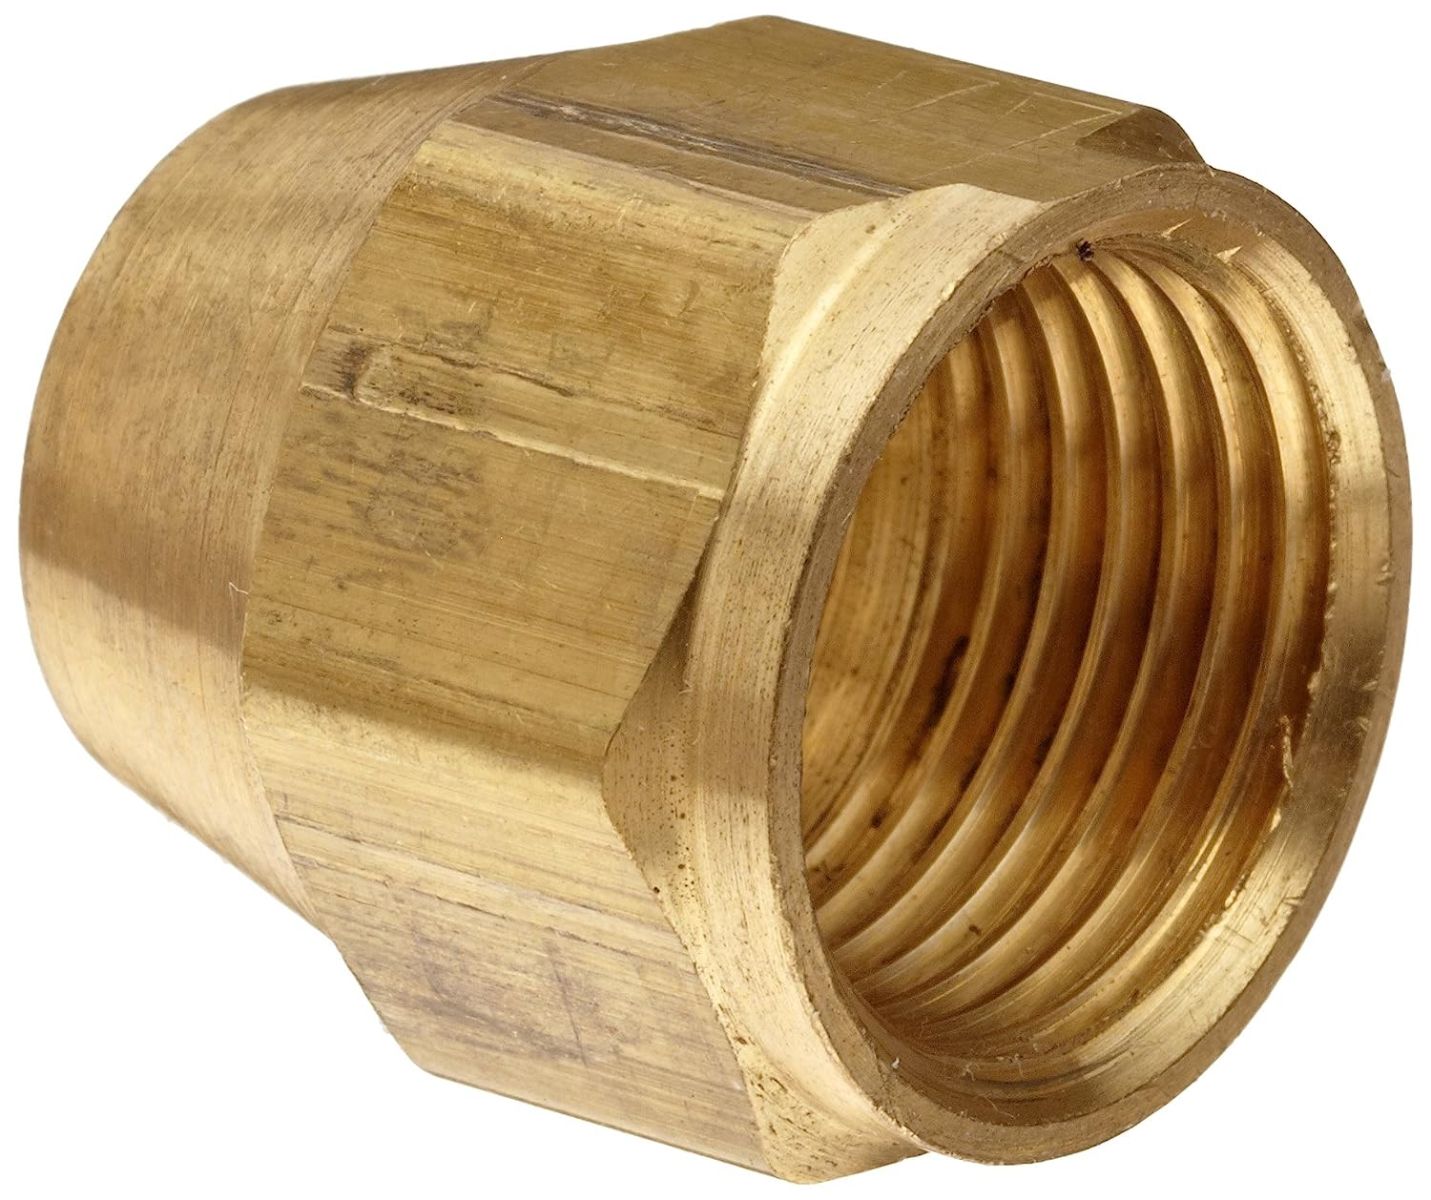 Anderson Metals 54014-06 Brass Tube Fitting, Short Flare Nut, 3/8" Tube OD